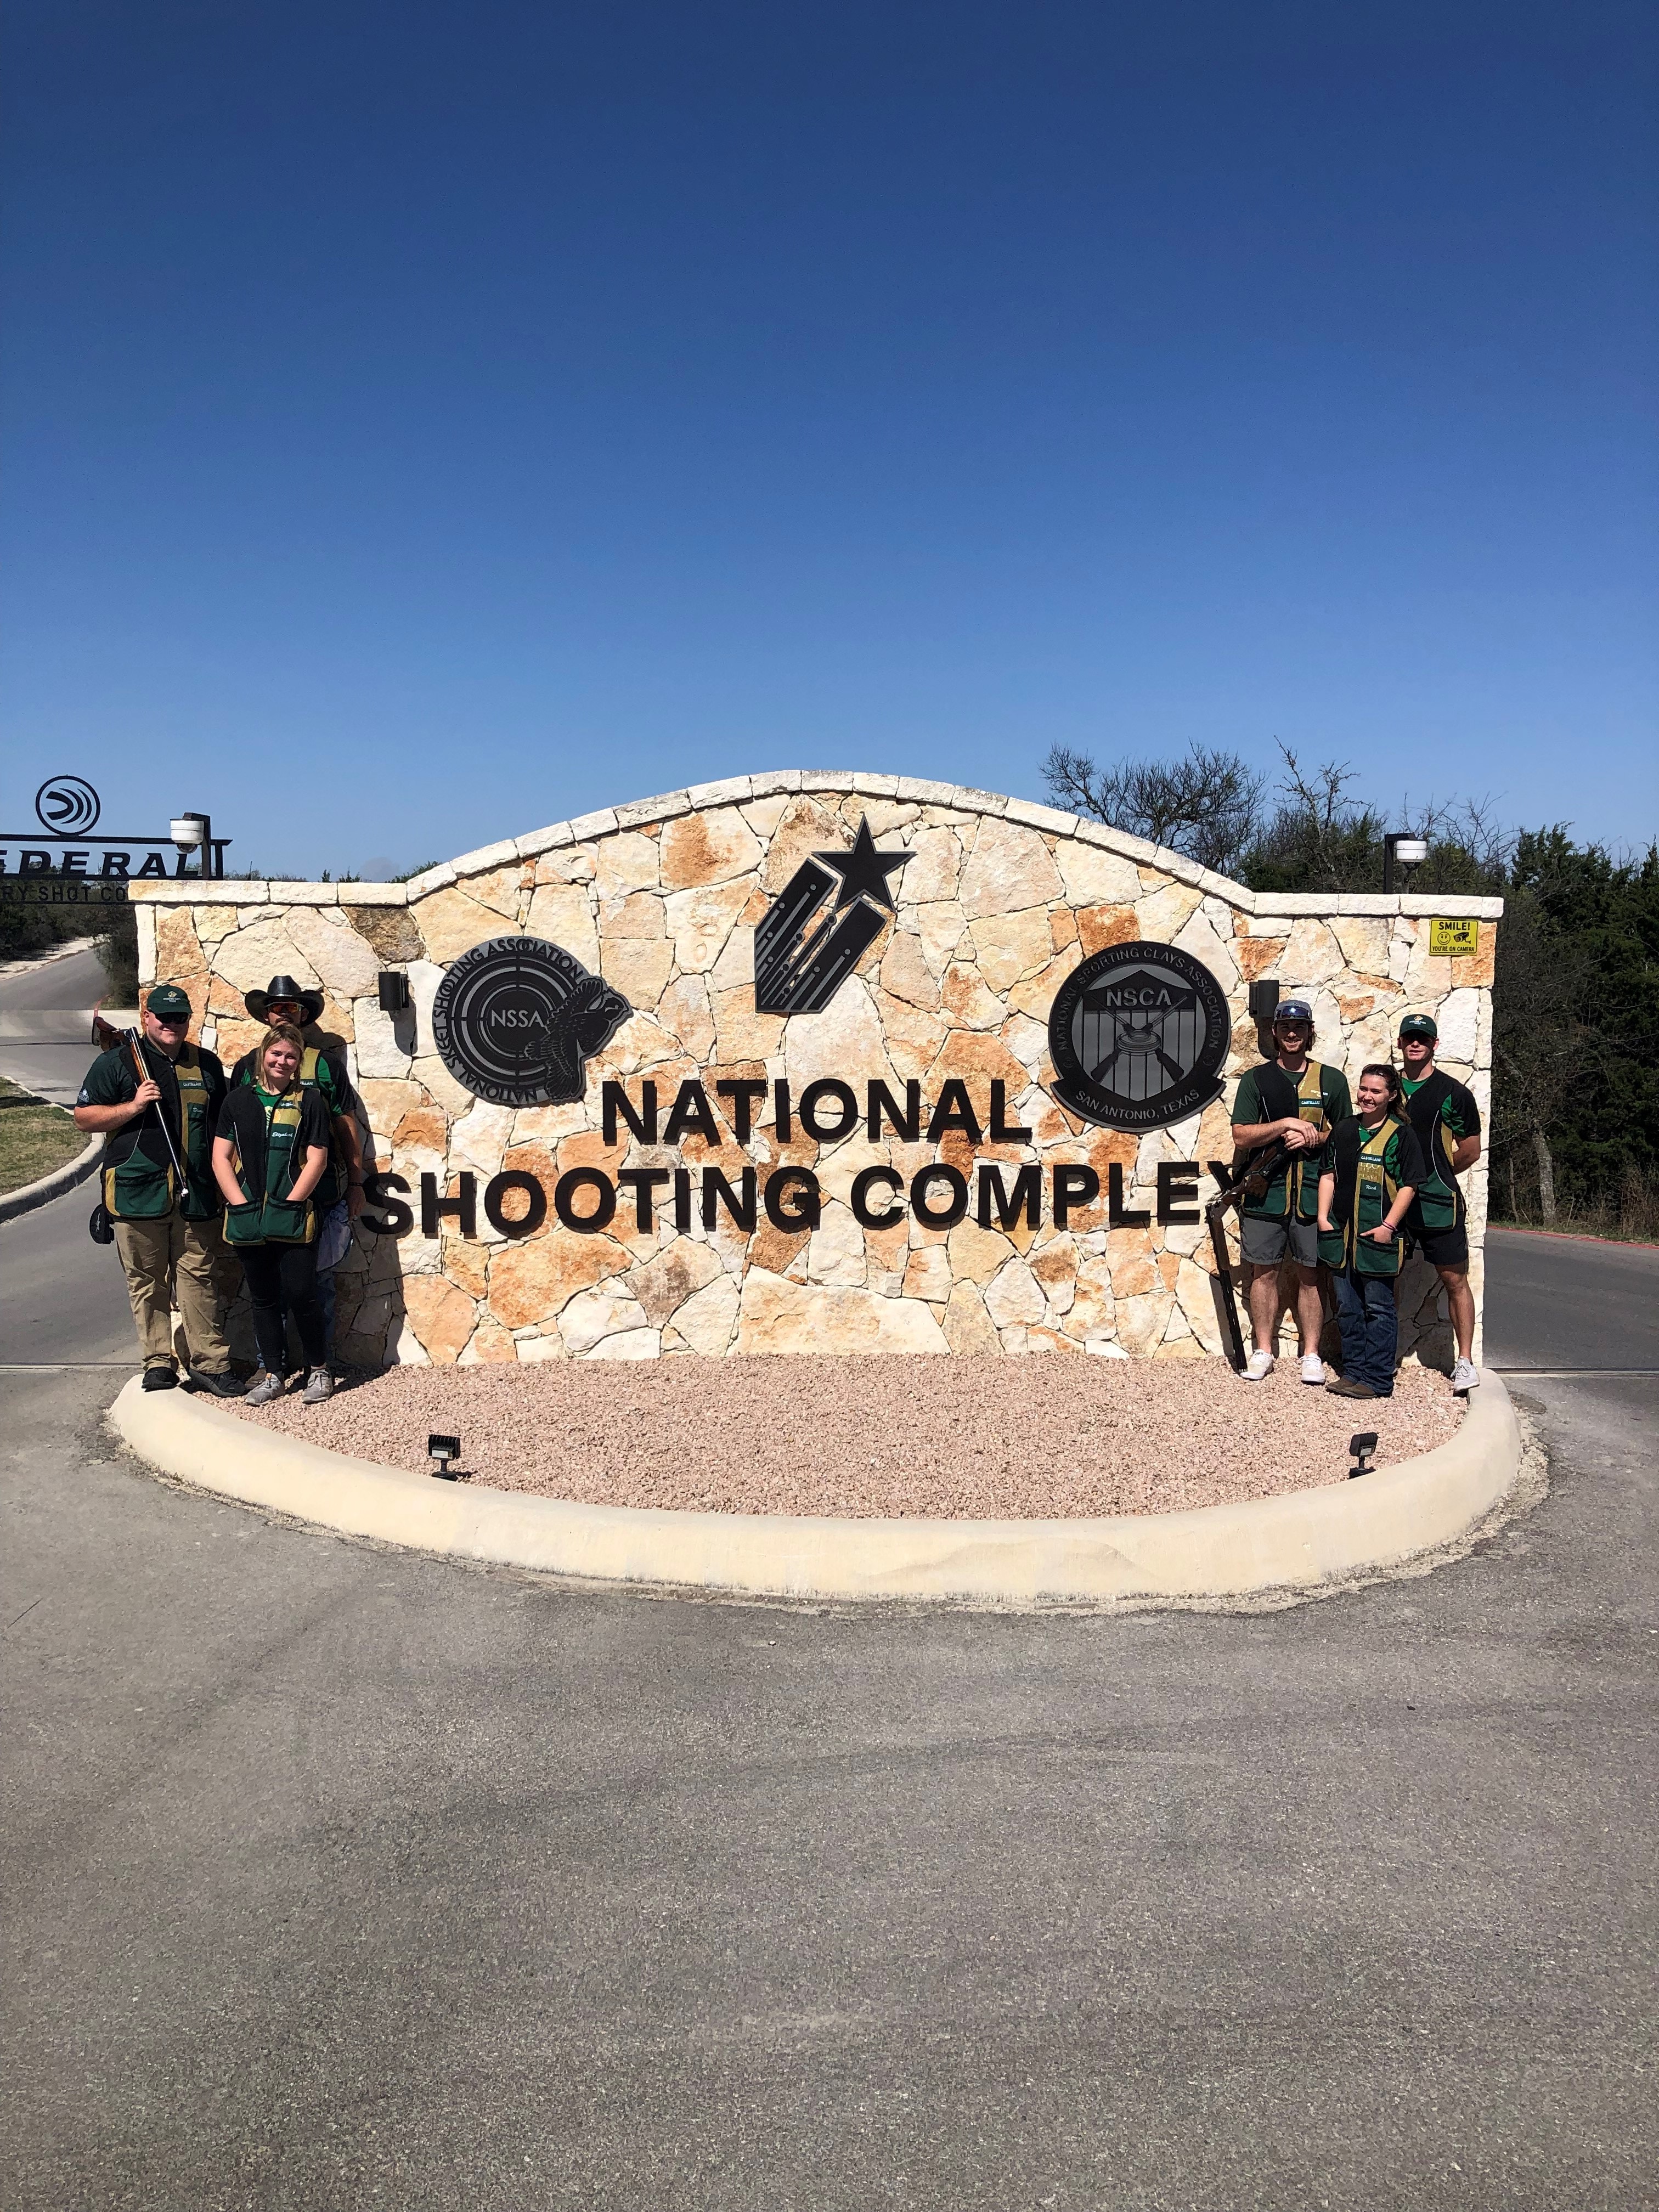 Sporting clays team earns 14th place in US in its first national competition